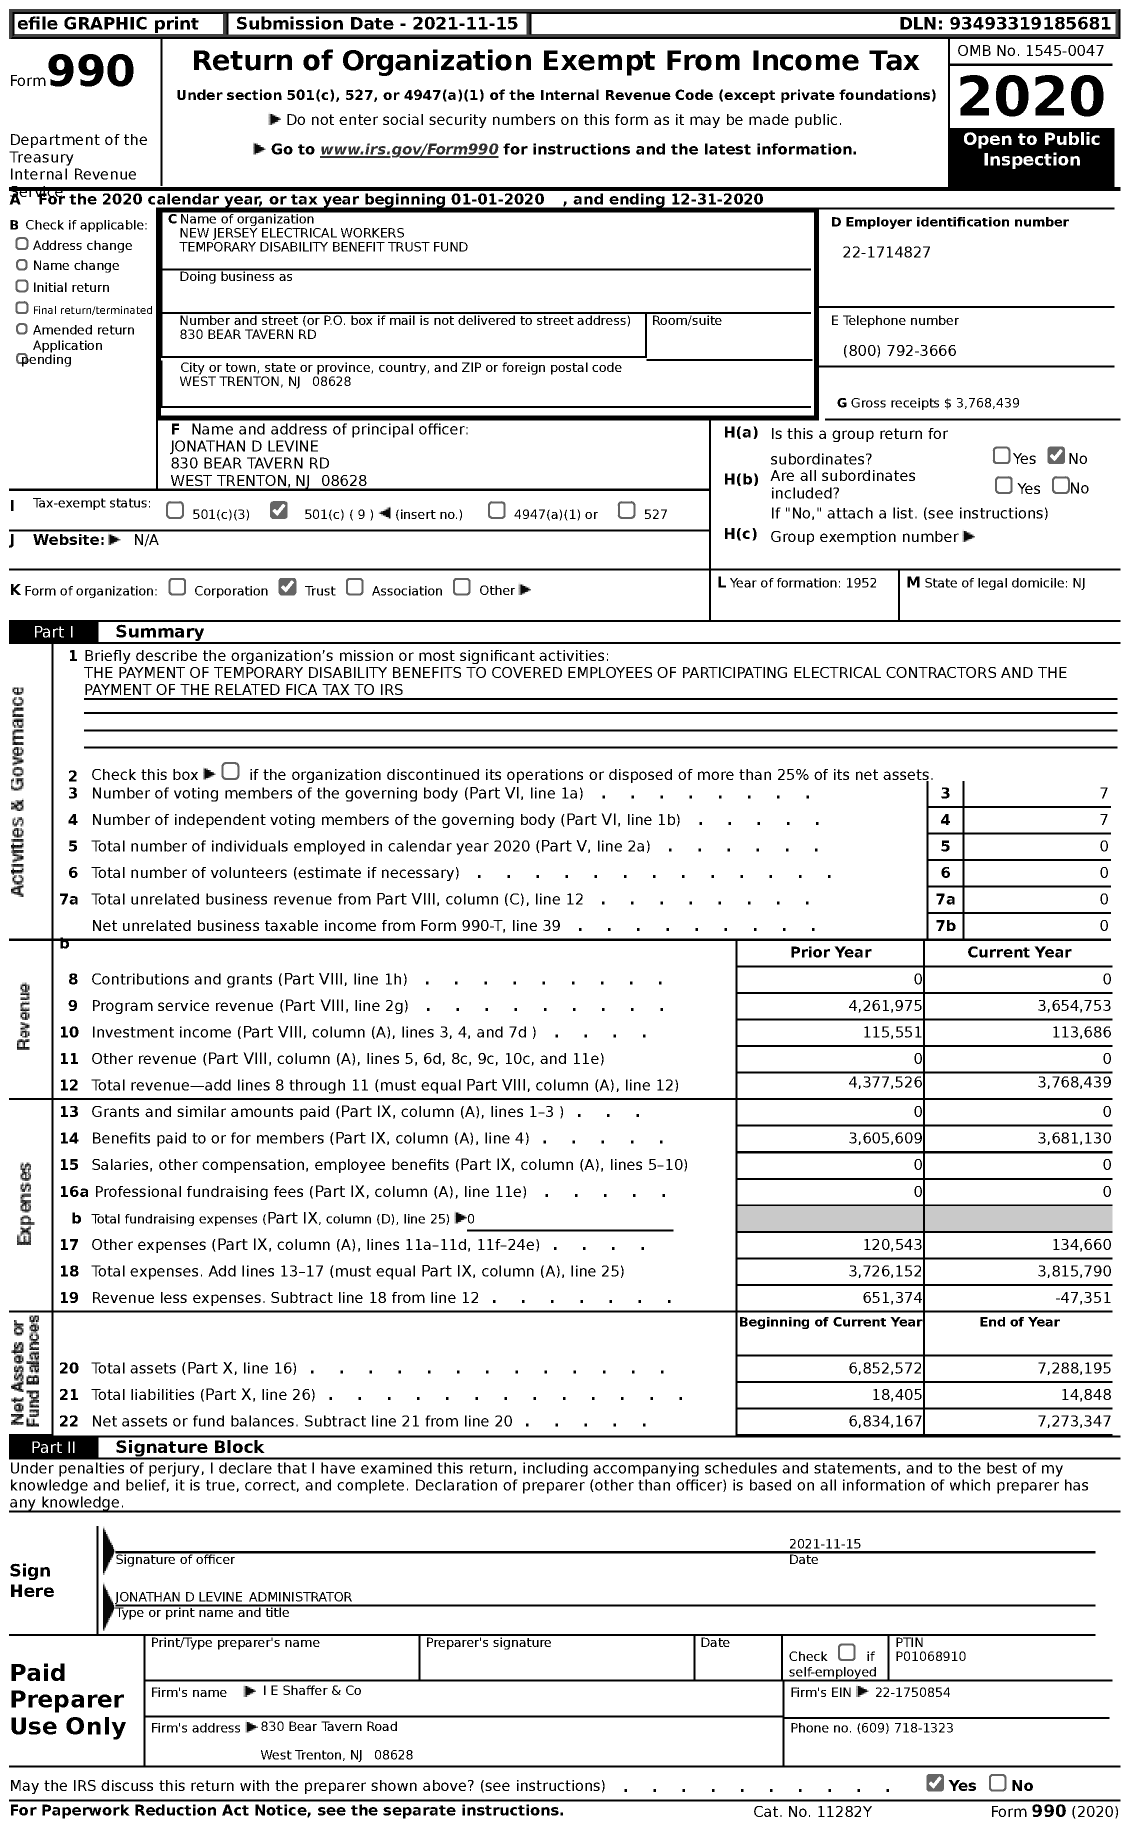 Image of first page of 2020 Form 990 for New Jersey Electrical Workers Temporary Disability Benefit Trust Fund